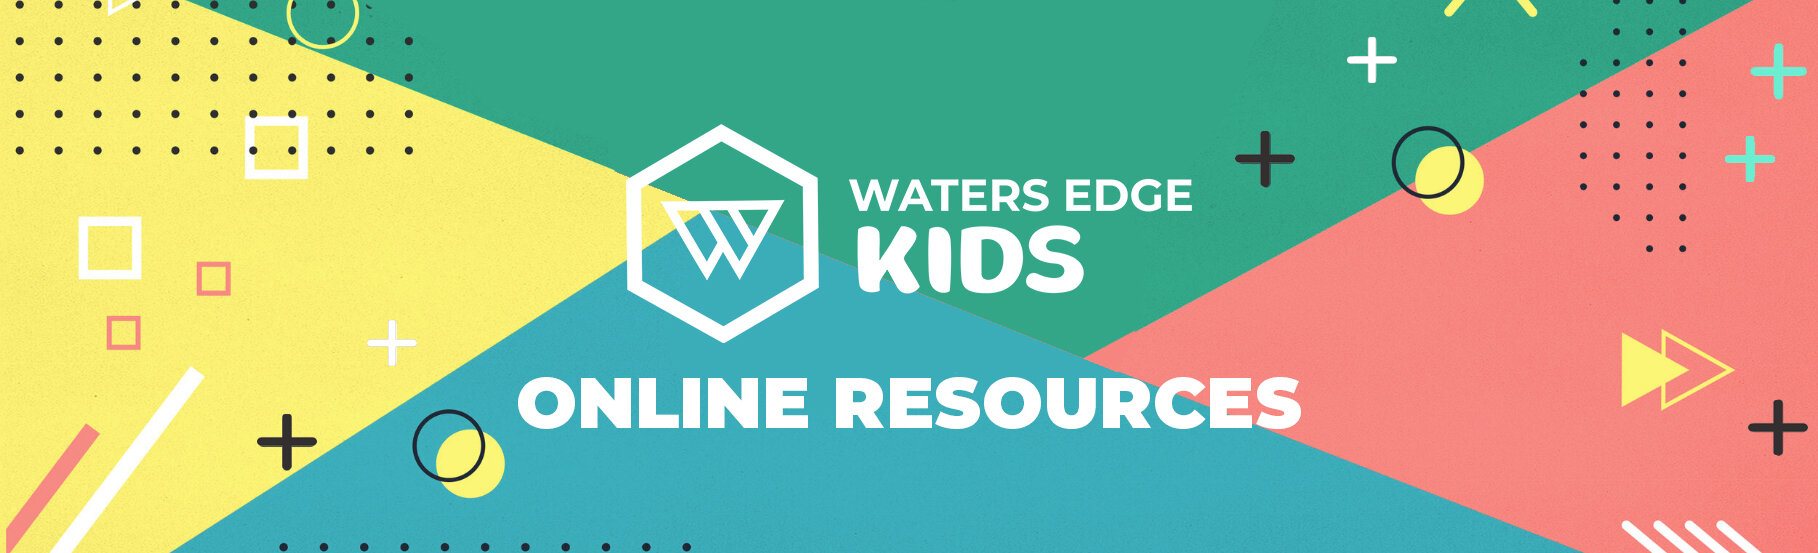 Kids Online Resources — Waters Edge Church